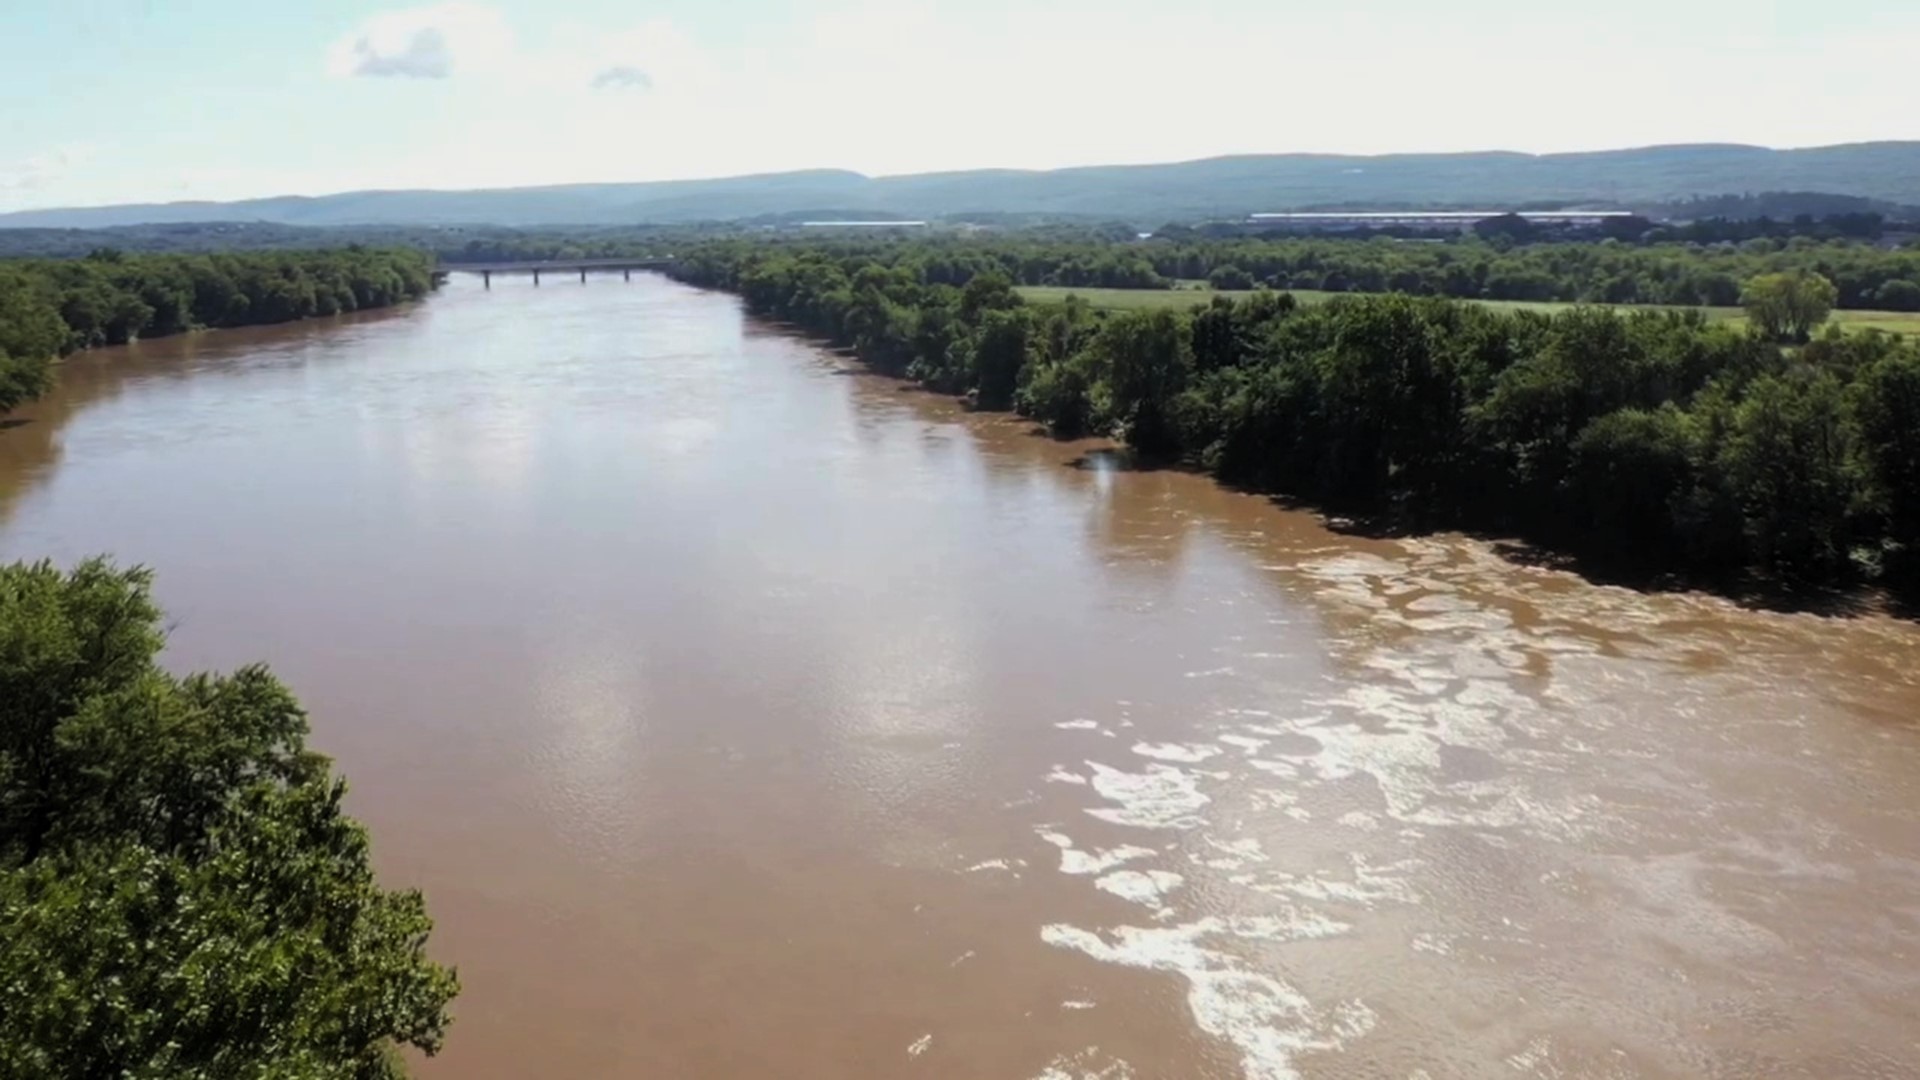 Despite the heavy rain on Wednesday, the river did not reach flood stage in Luzerne County.